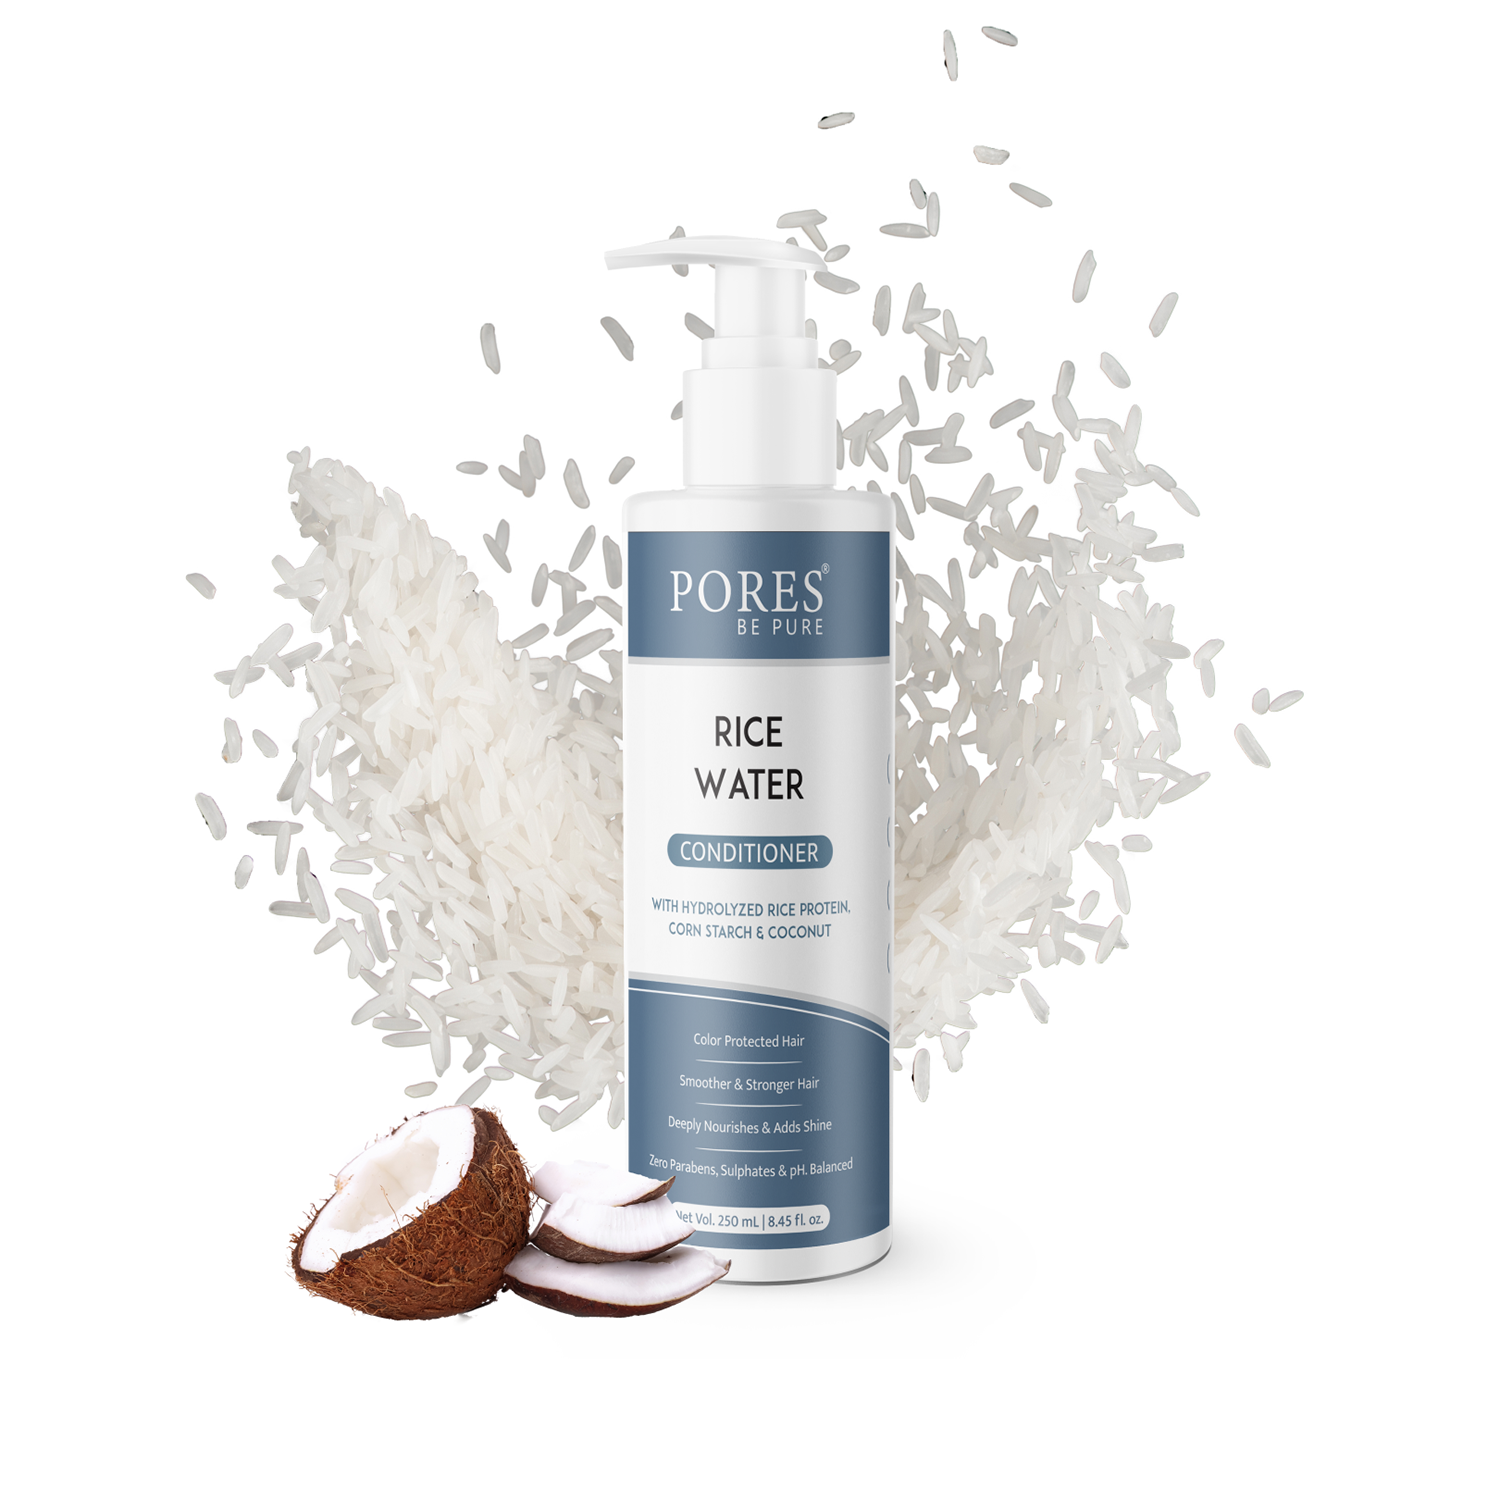 RICE WATER CONDITIONER - With Hydrolyzed Rice Protein, Corn Starch & Coconut - 250 mL